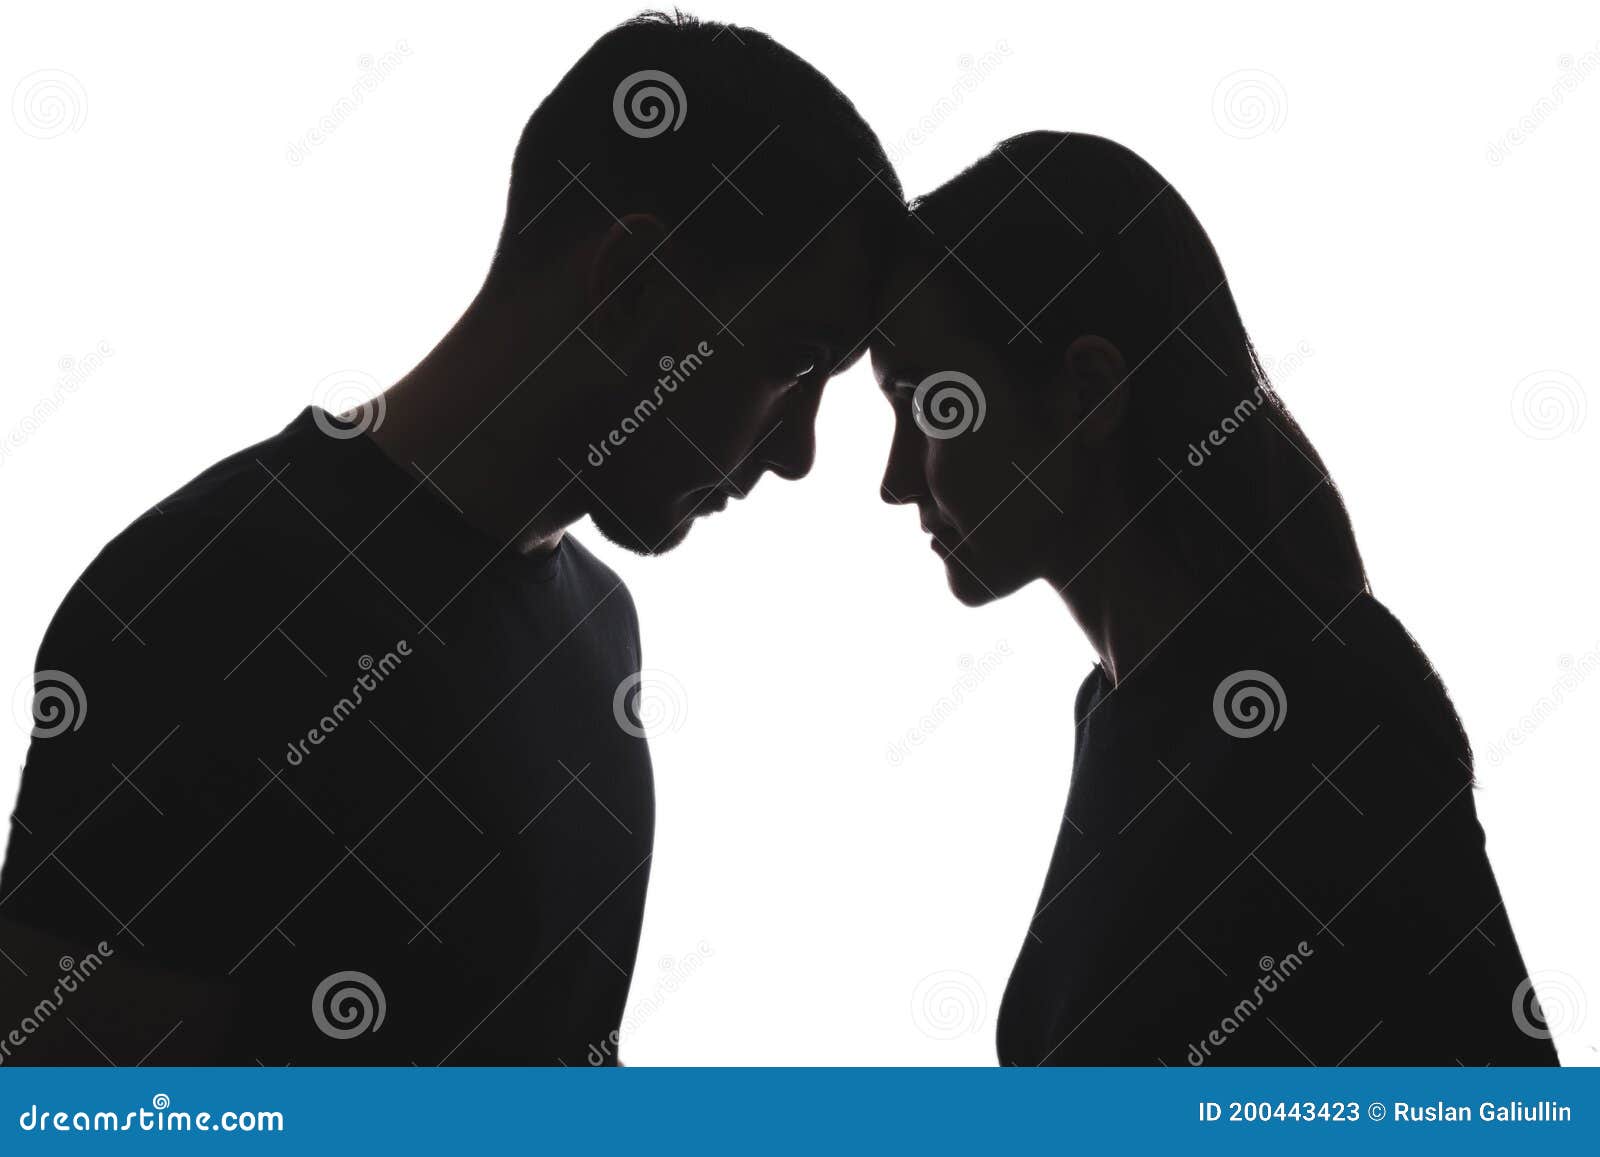 black and white silhouettes of portraits men and women on white background stand opposite each other, touching their foreheads.